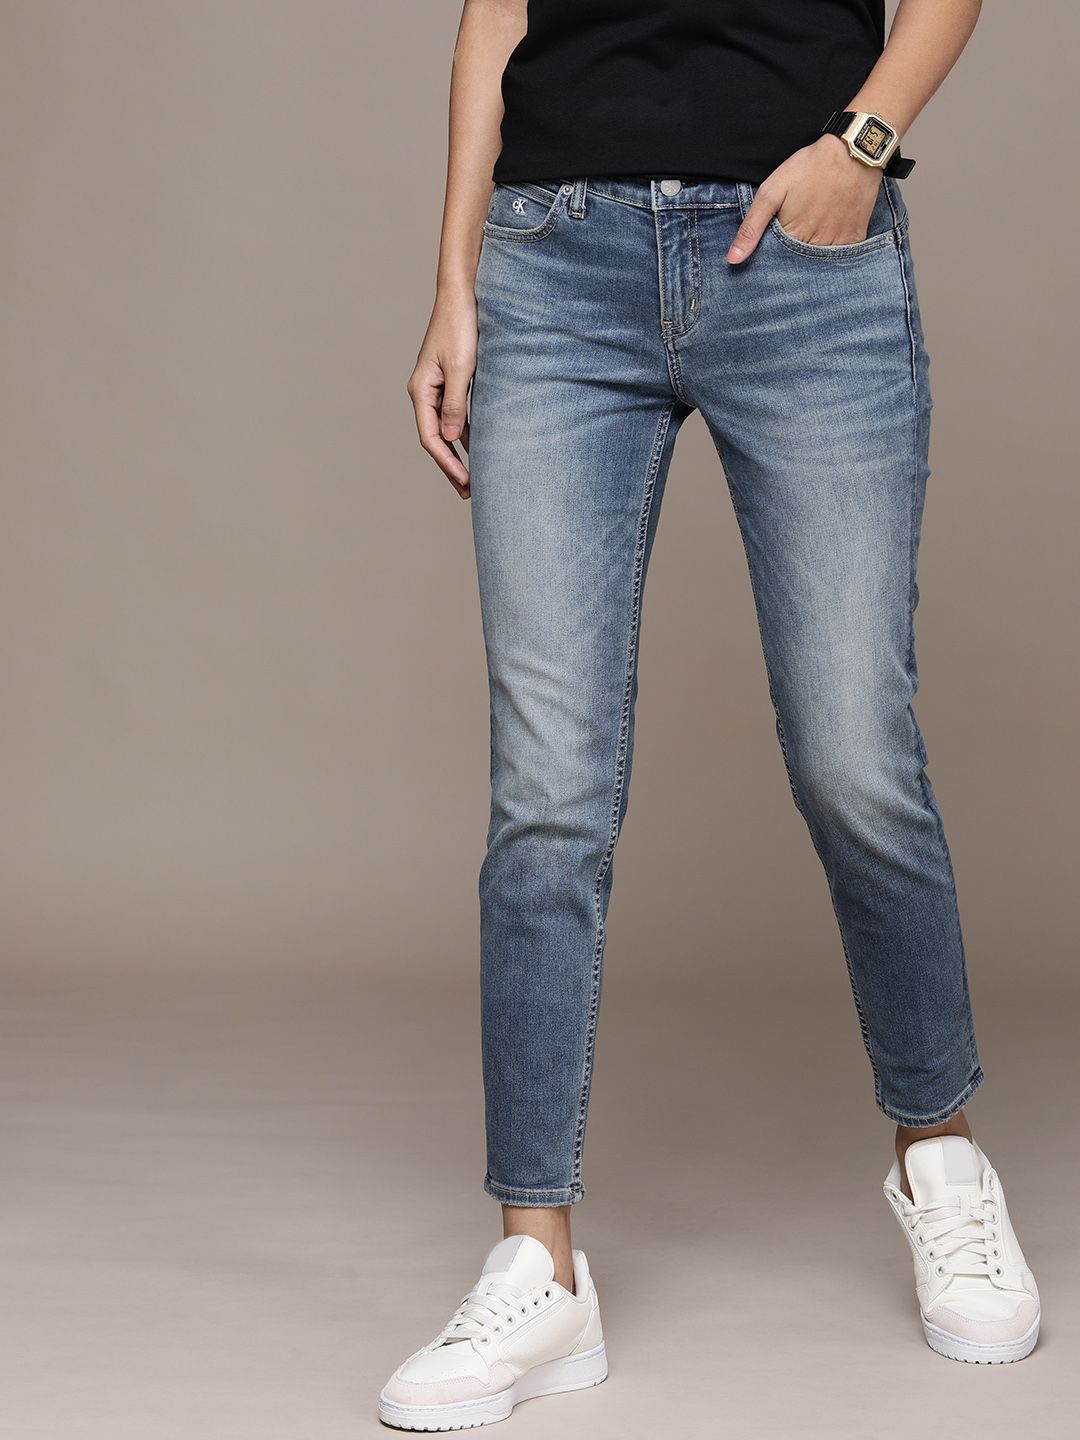 Calvin Klein Jeans Women Blue Body Slim Fit Heavy Fade Ankle Length Stretchable Jeans Price in India